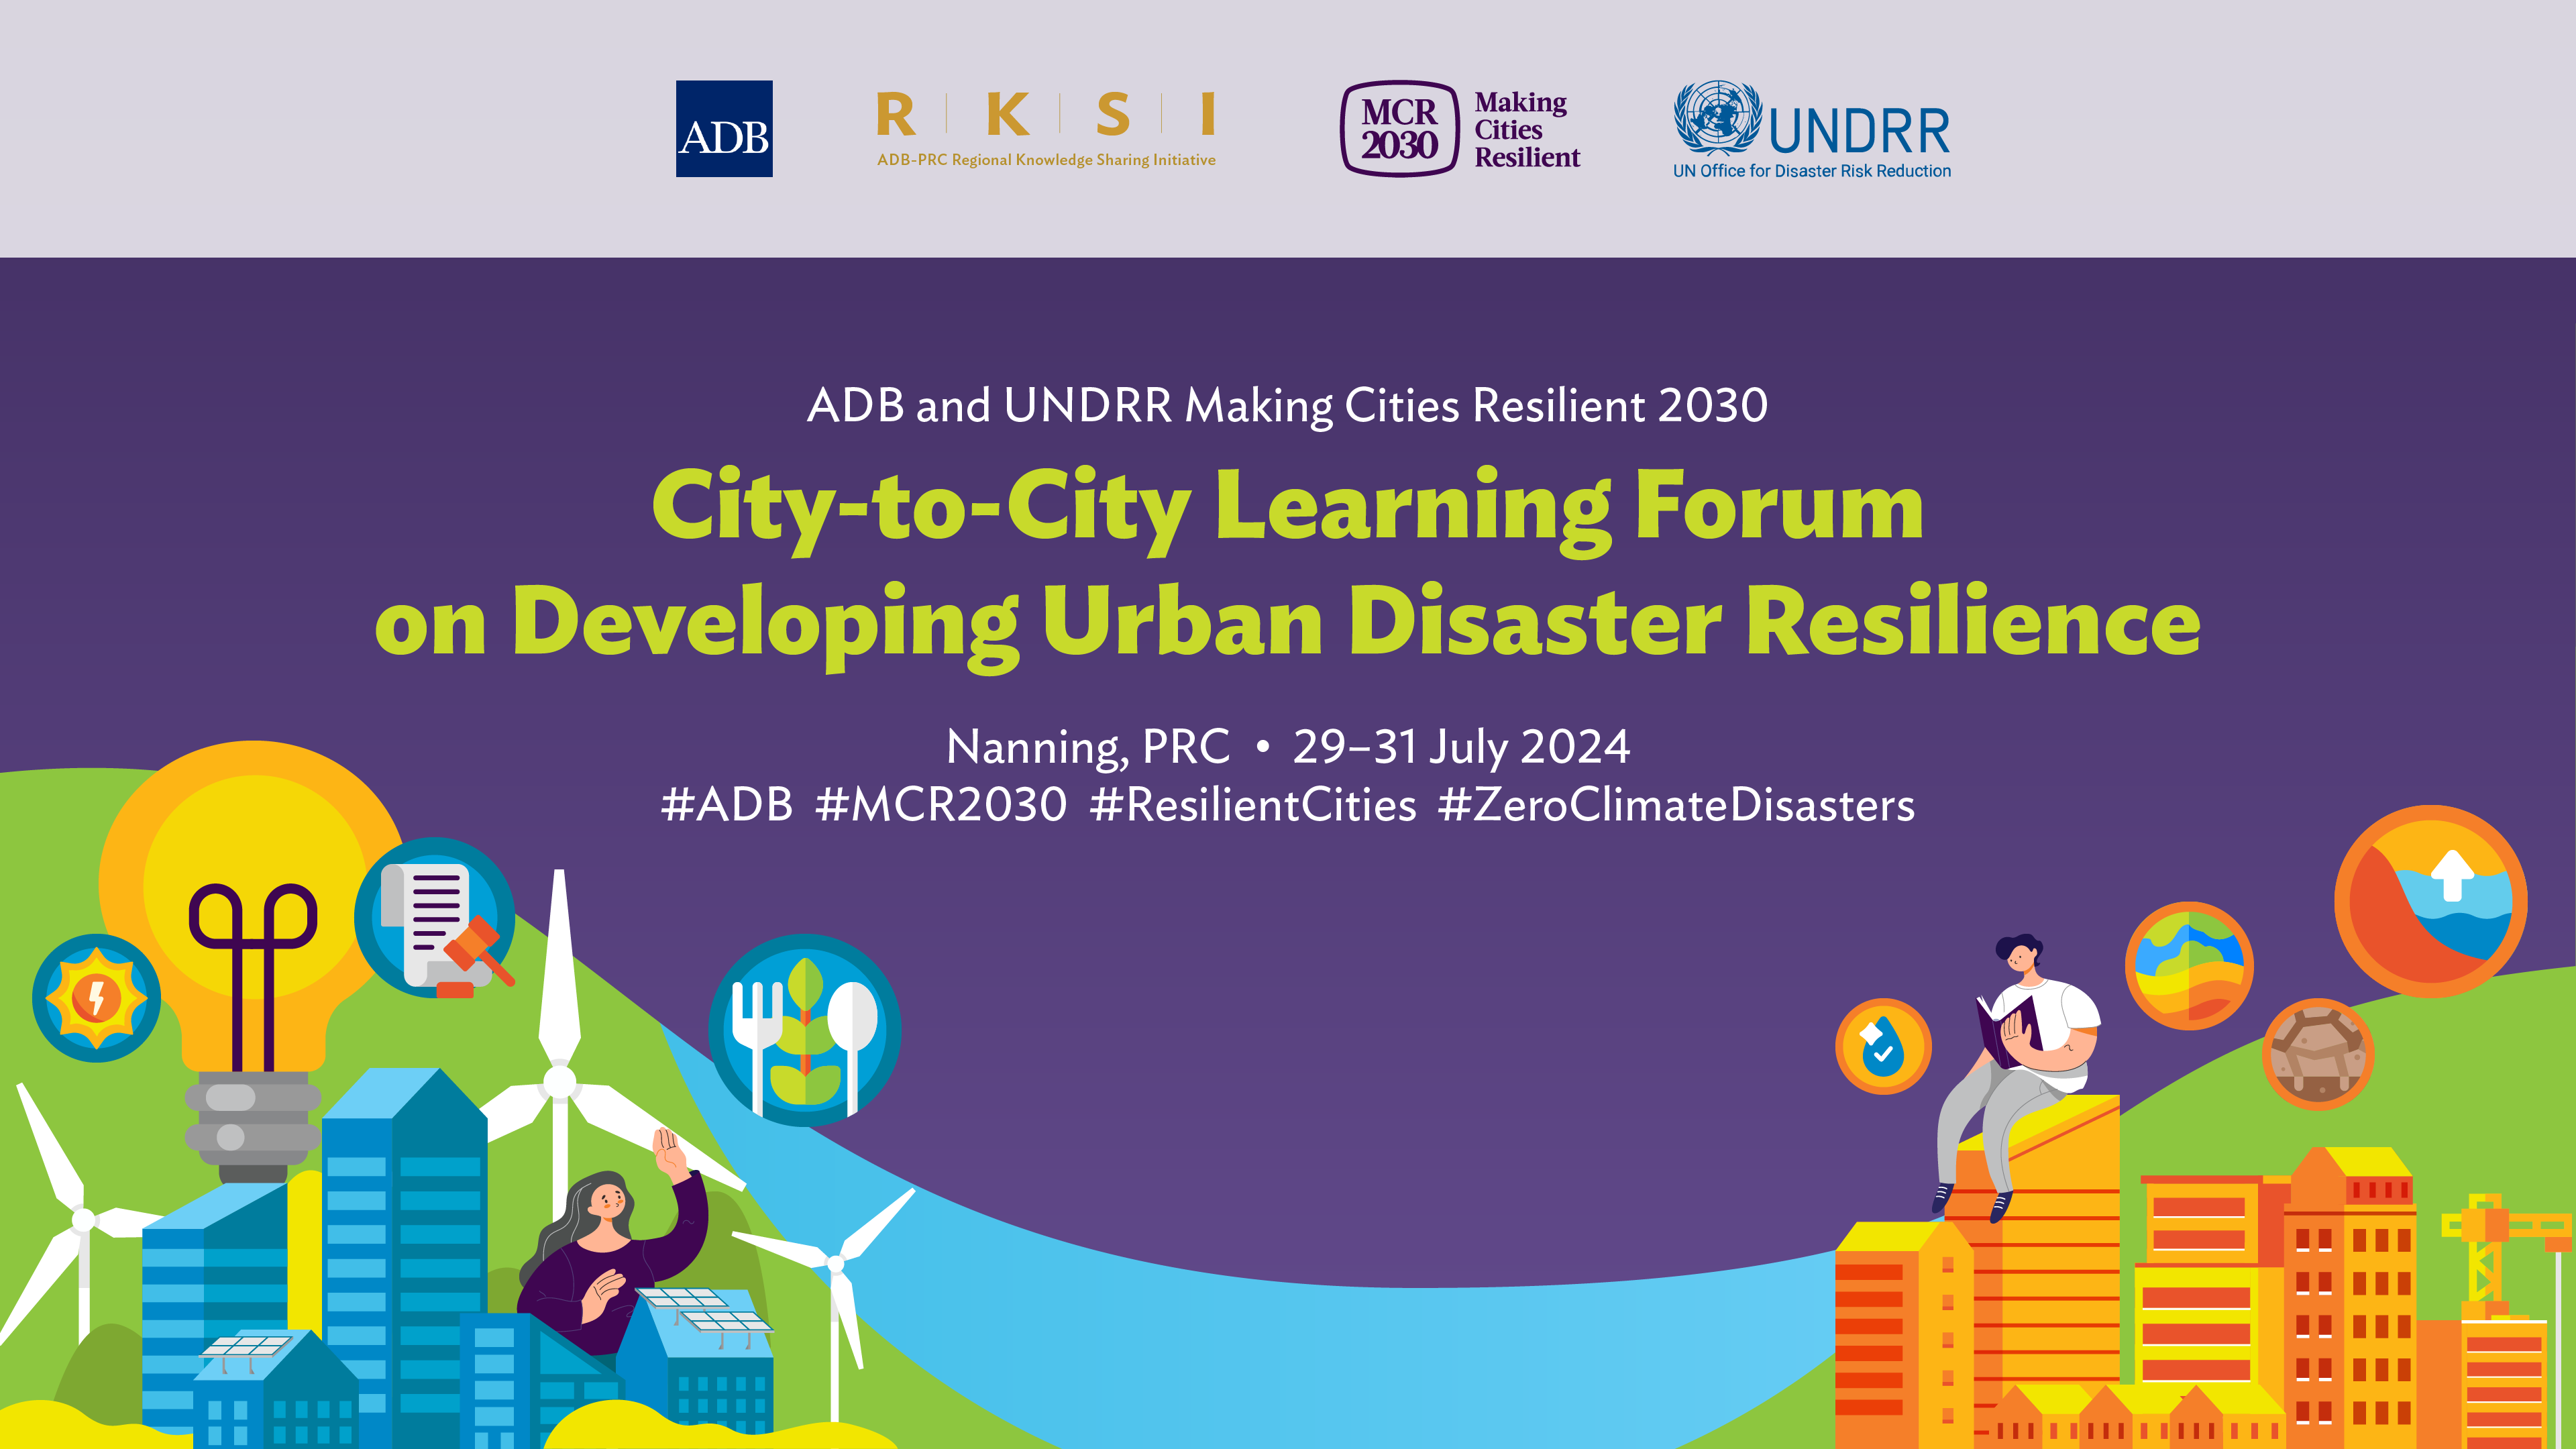 ADB and UNDRR Making Cities Resilient 2030 (MCR 2030) City-to-City Learning Forum on Developing Urban Disaster Resilience